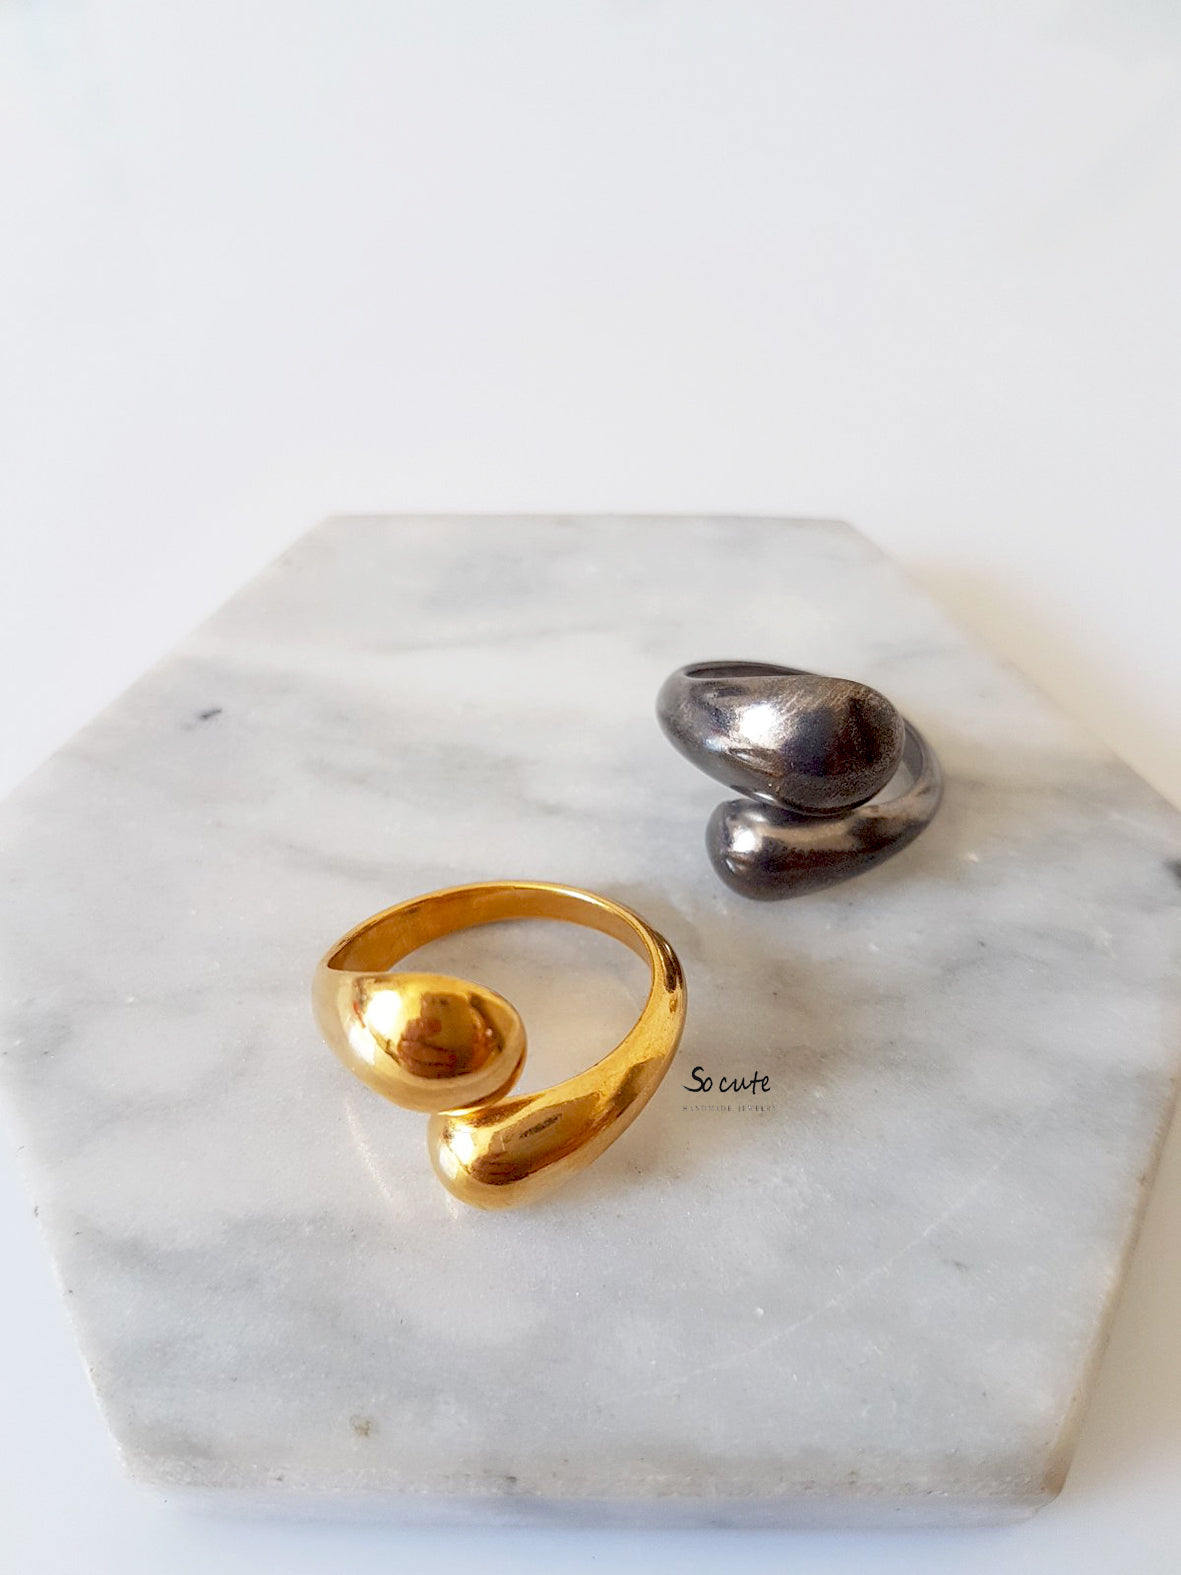 Sylvie ring in a package of 3 pieces